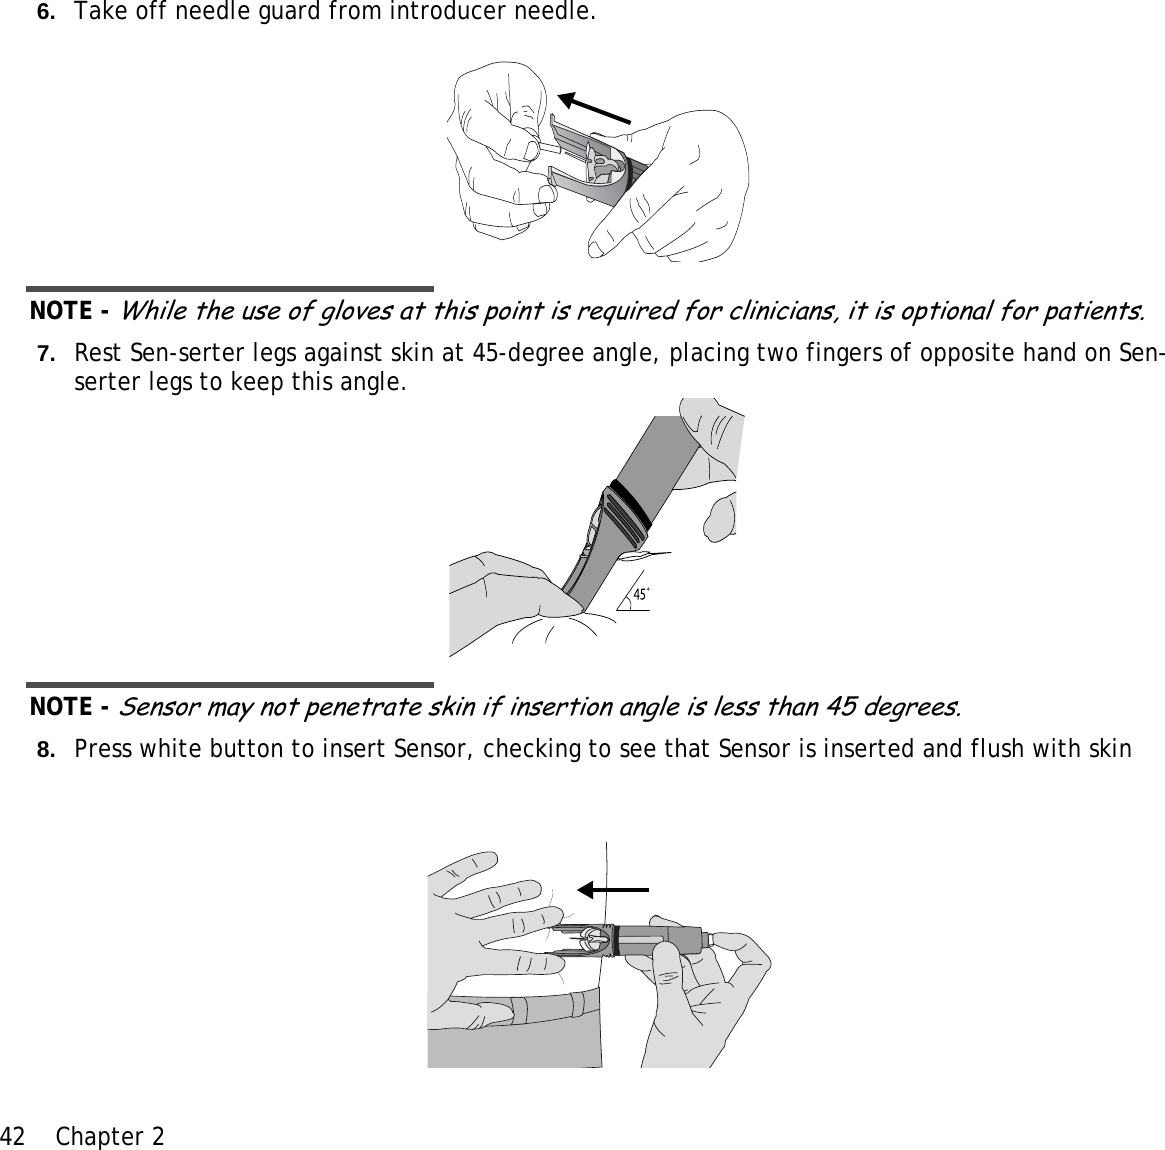 42 Chapter 2 6. Take off needle guard from introducer needle.NOTE - While the use of gloves at this point is required for clinicians, it is optional for patients.7. Rest Sen-serter legs against skin at 45-degree angle, placing two fingers of opposite hand on Sen-serter legs to keep this angle. NOTE - Sensor may not penetrate skin if insertion angle is less than 45 degrees.8. Press white button to insert Sensor, checking to see that Sensor is inserted and flush with skin